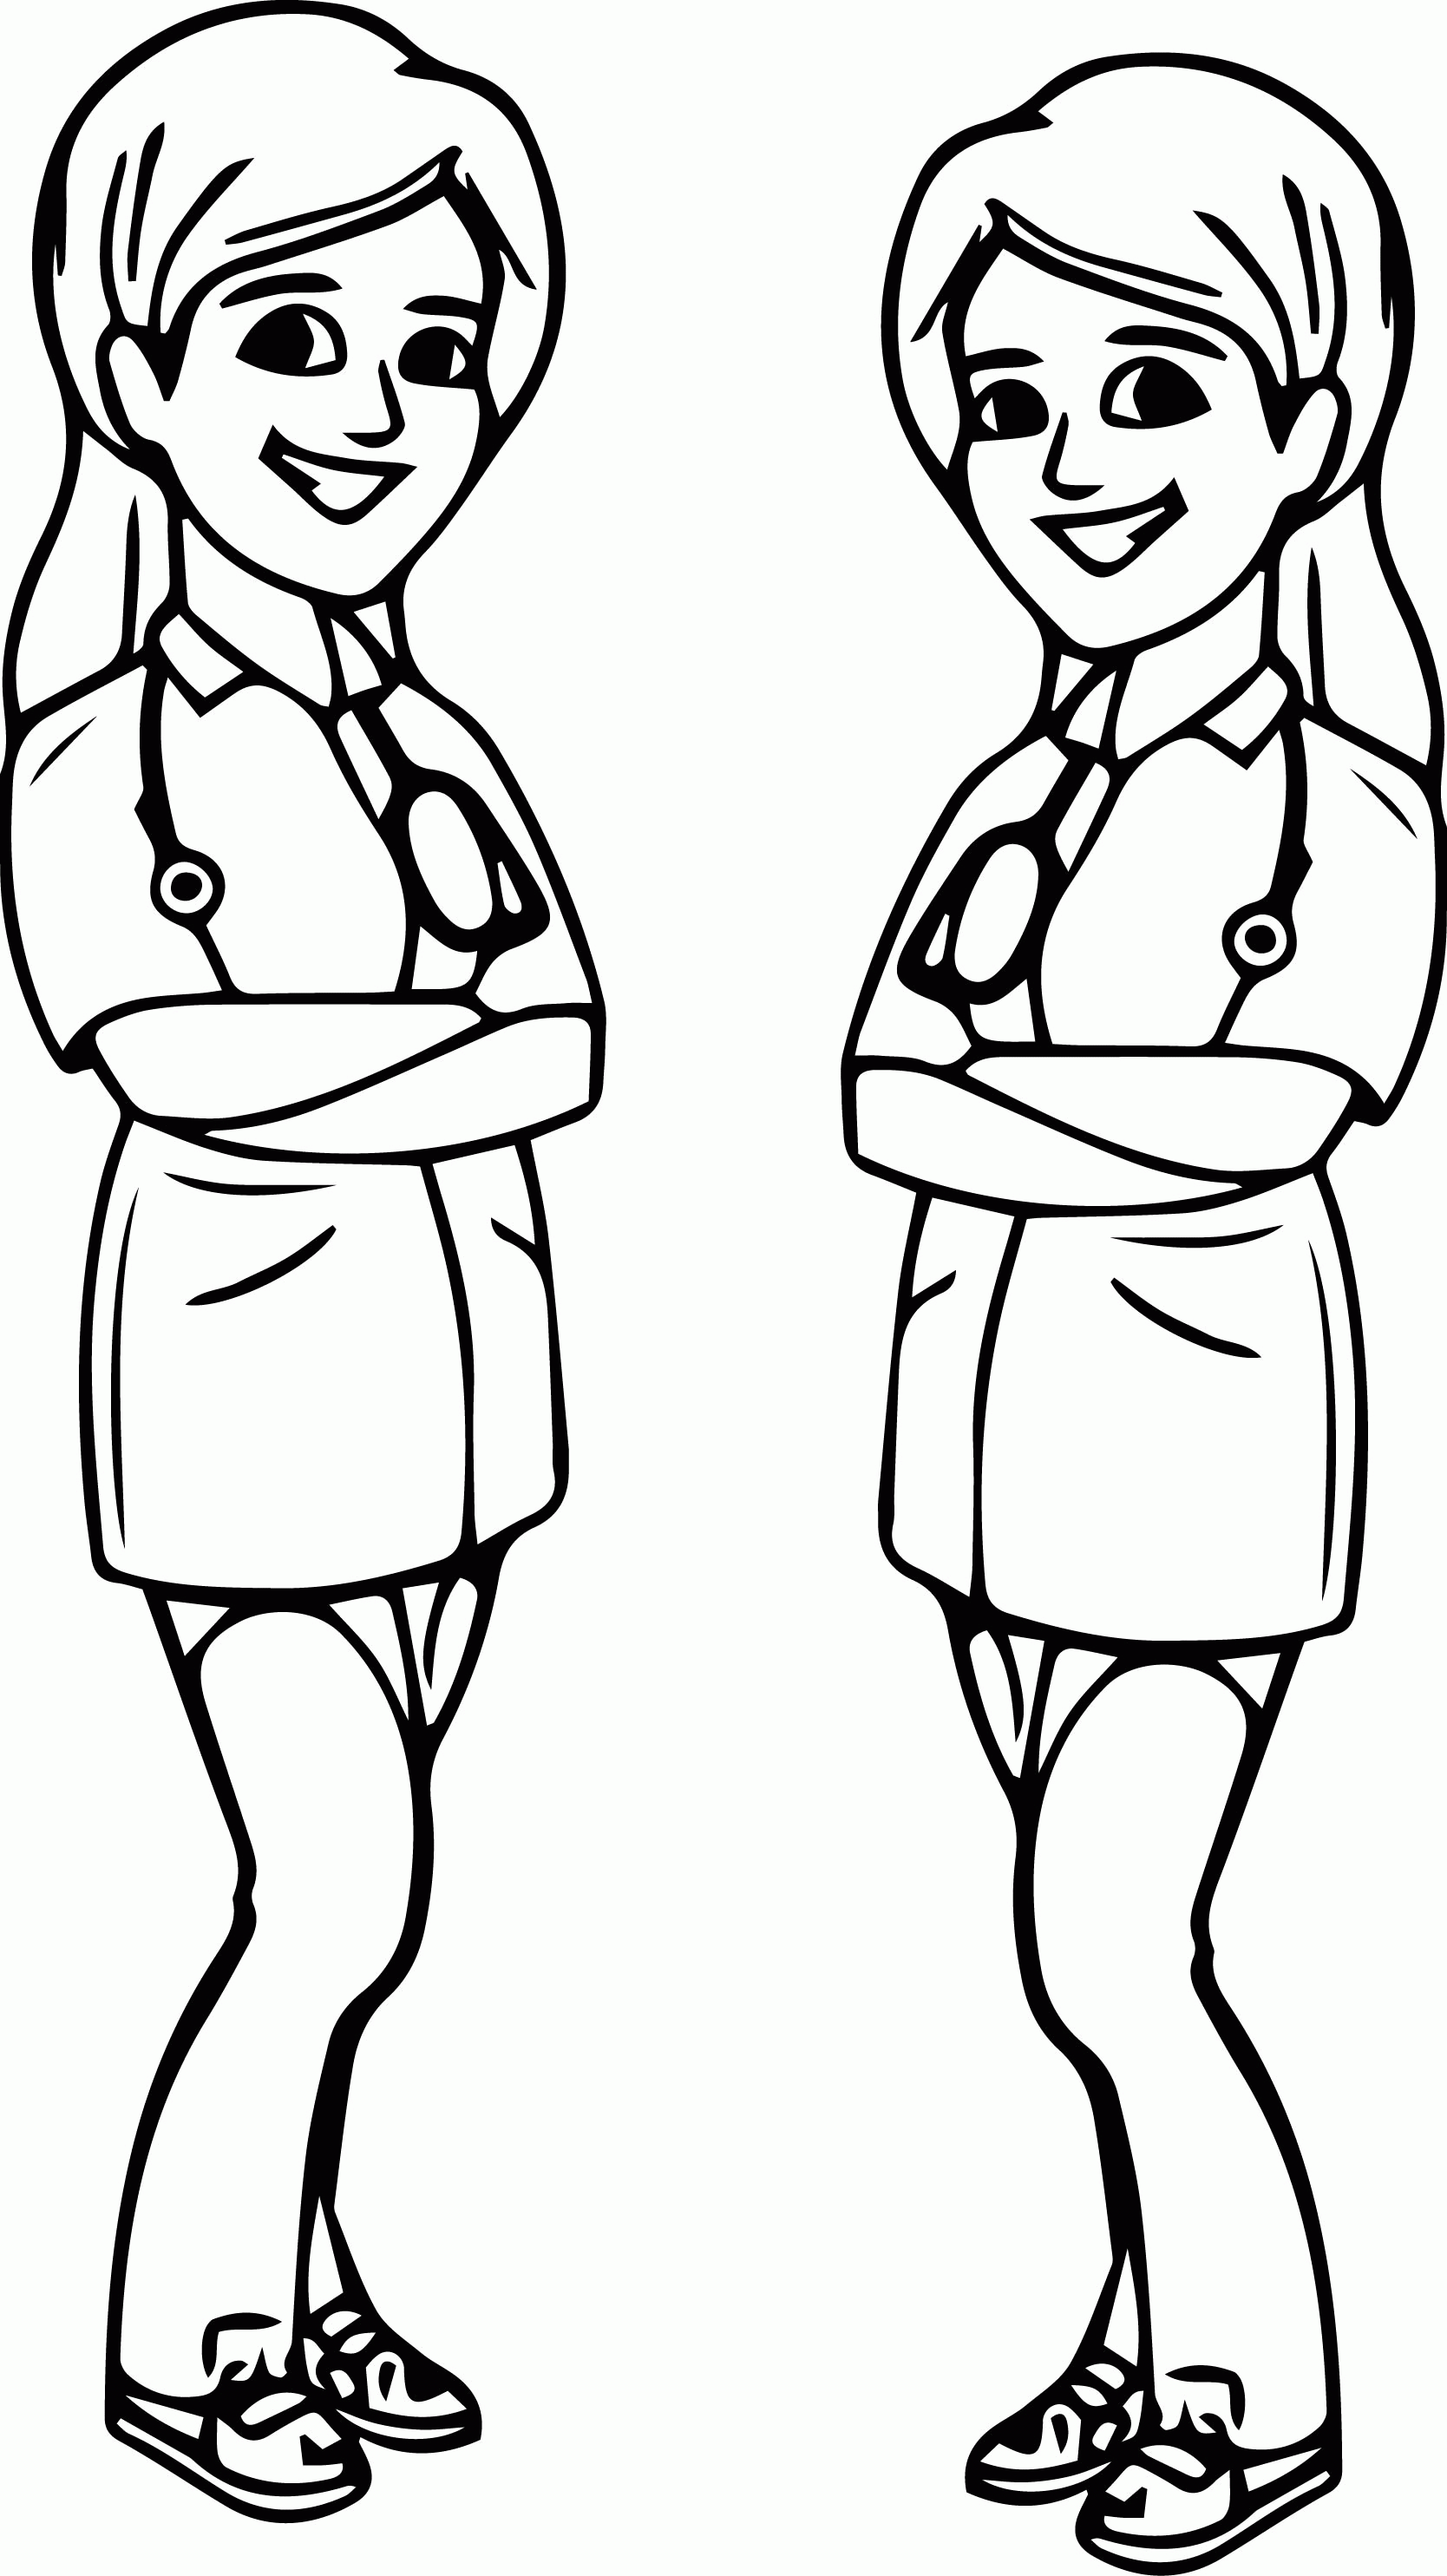 Female Physician With Stethoscope Coloring Page | Wecoloringpage